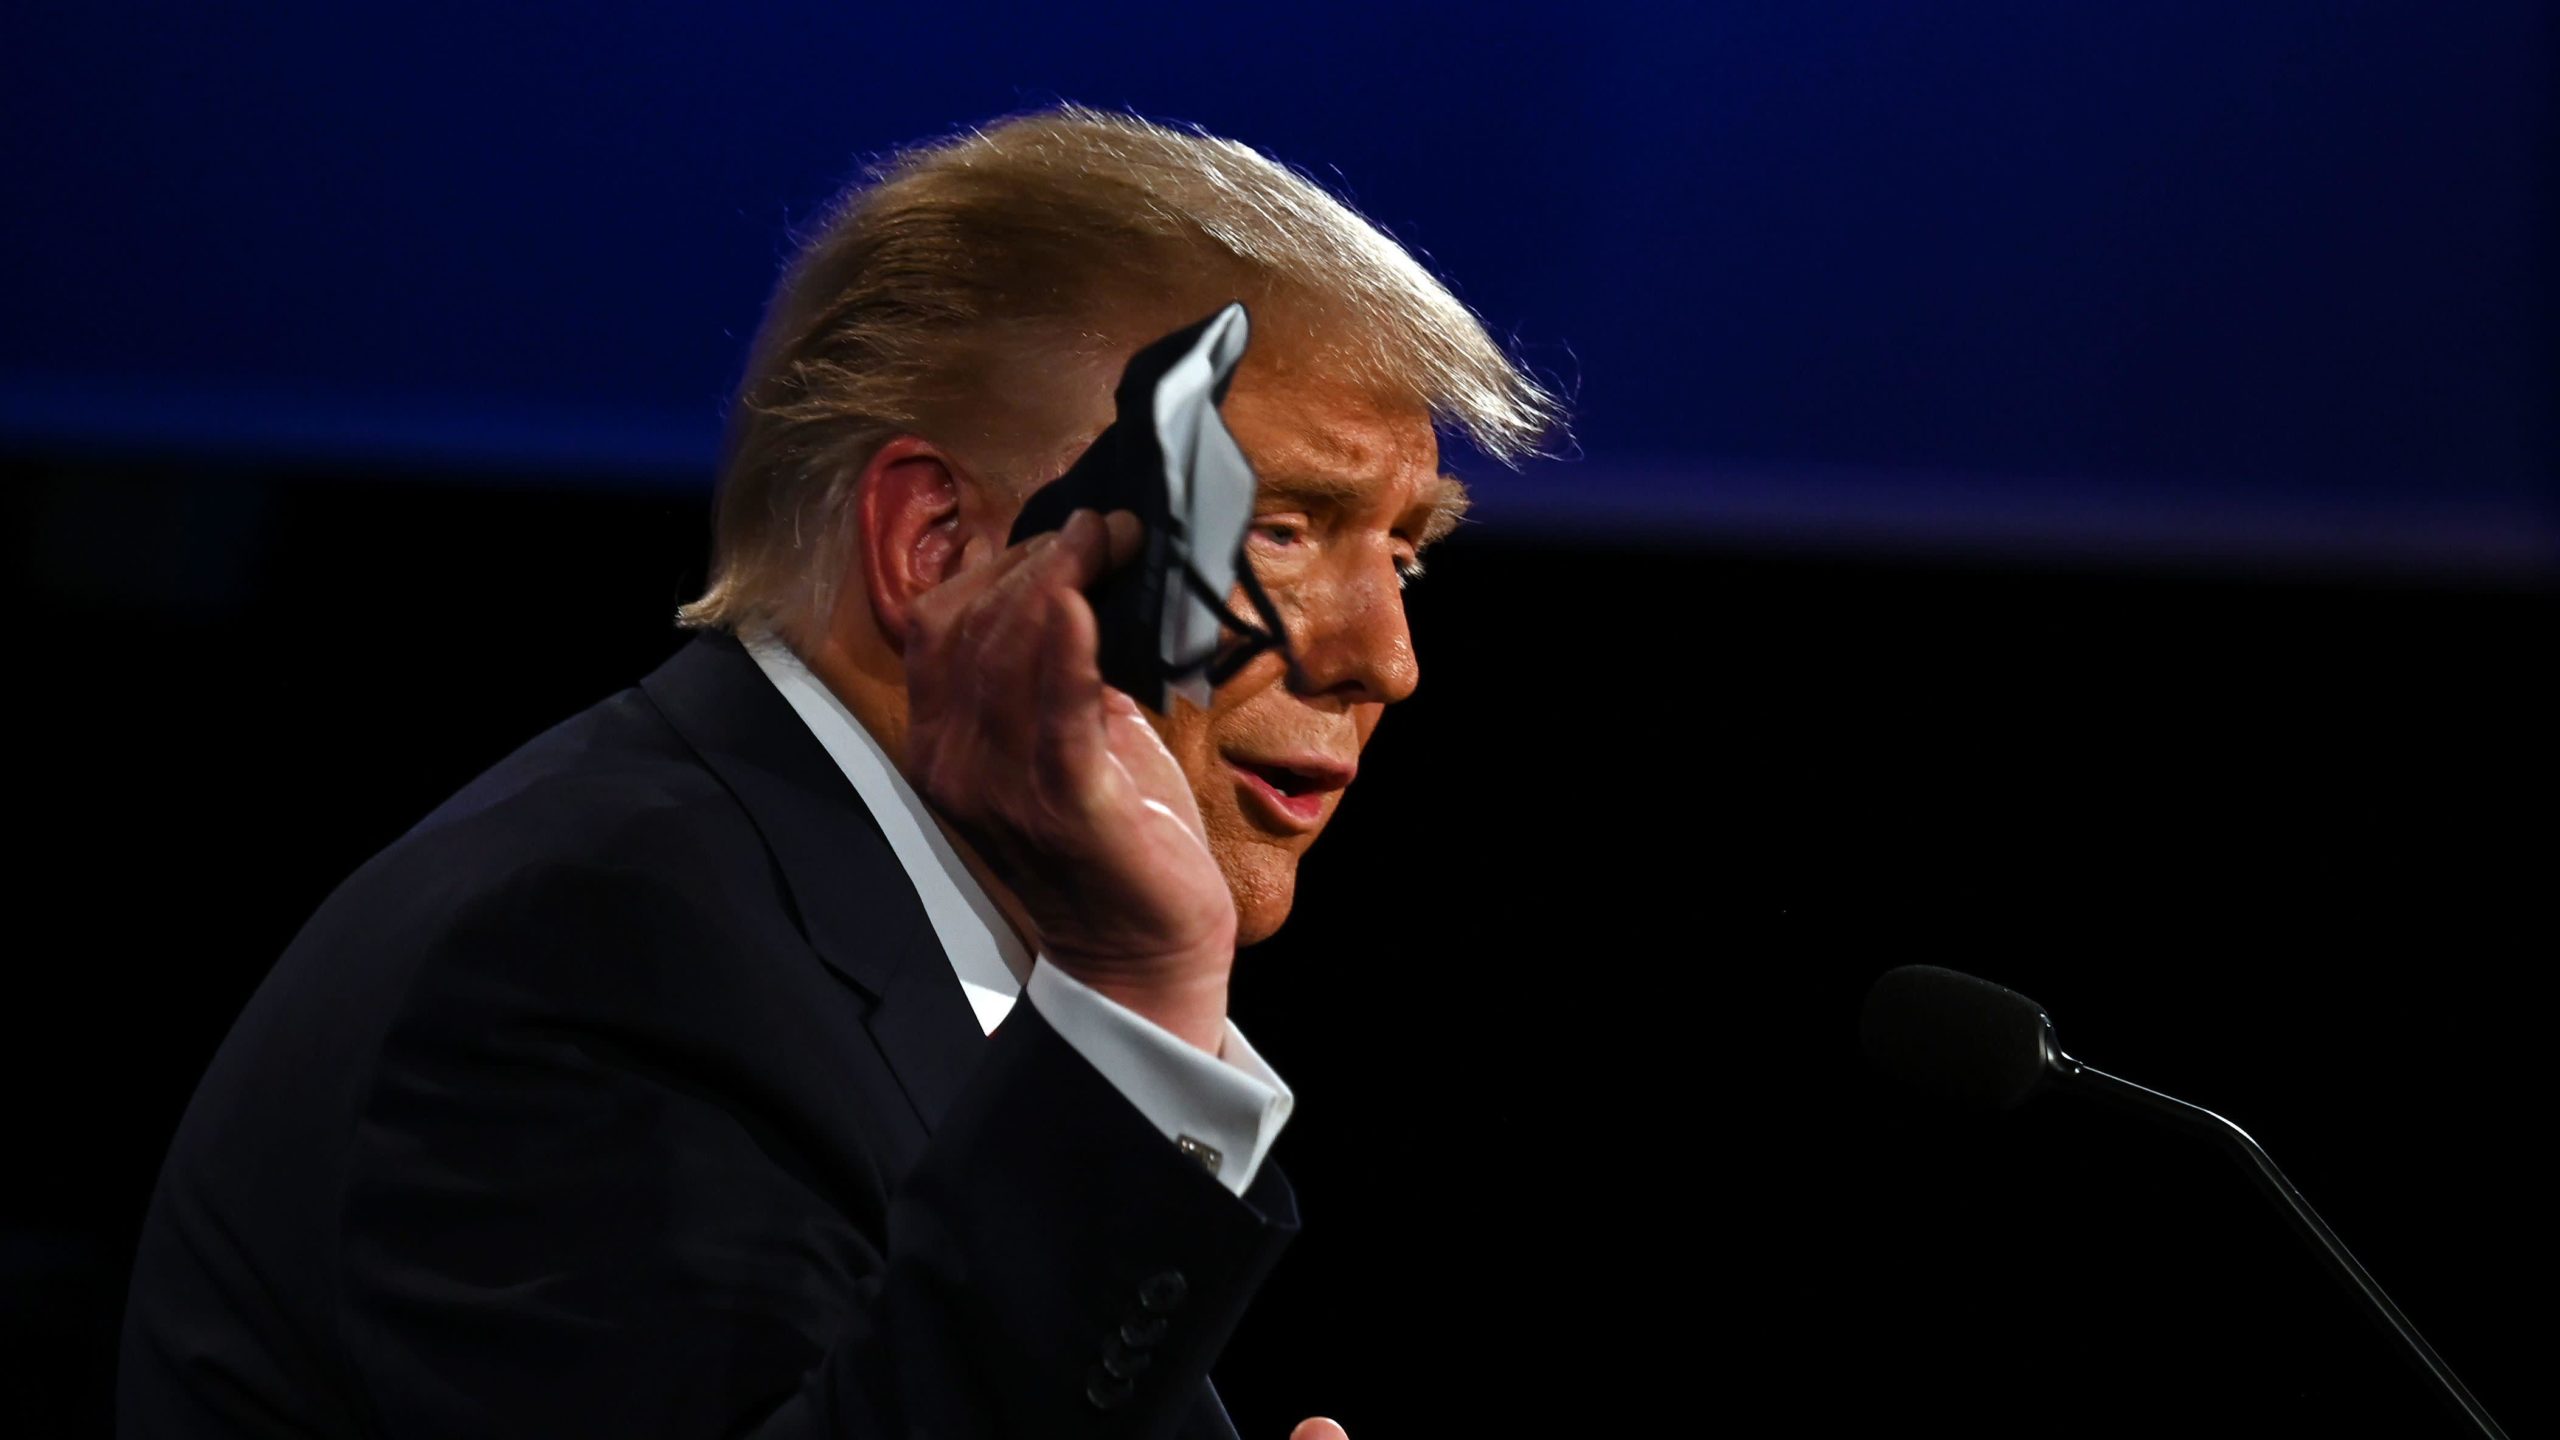 U.S. President Donald Trump holds a face mask as he speaks during the first presidential debate. (Photo: Jim Watson / AFP, Getty Images)